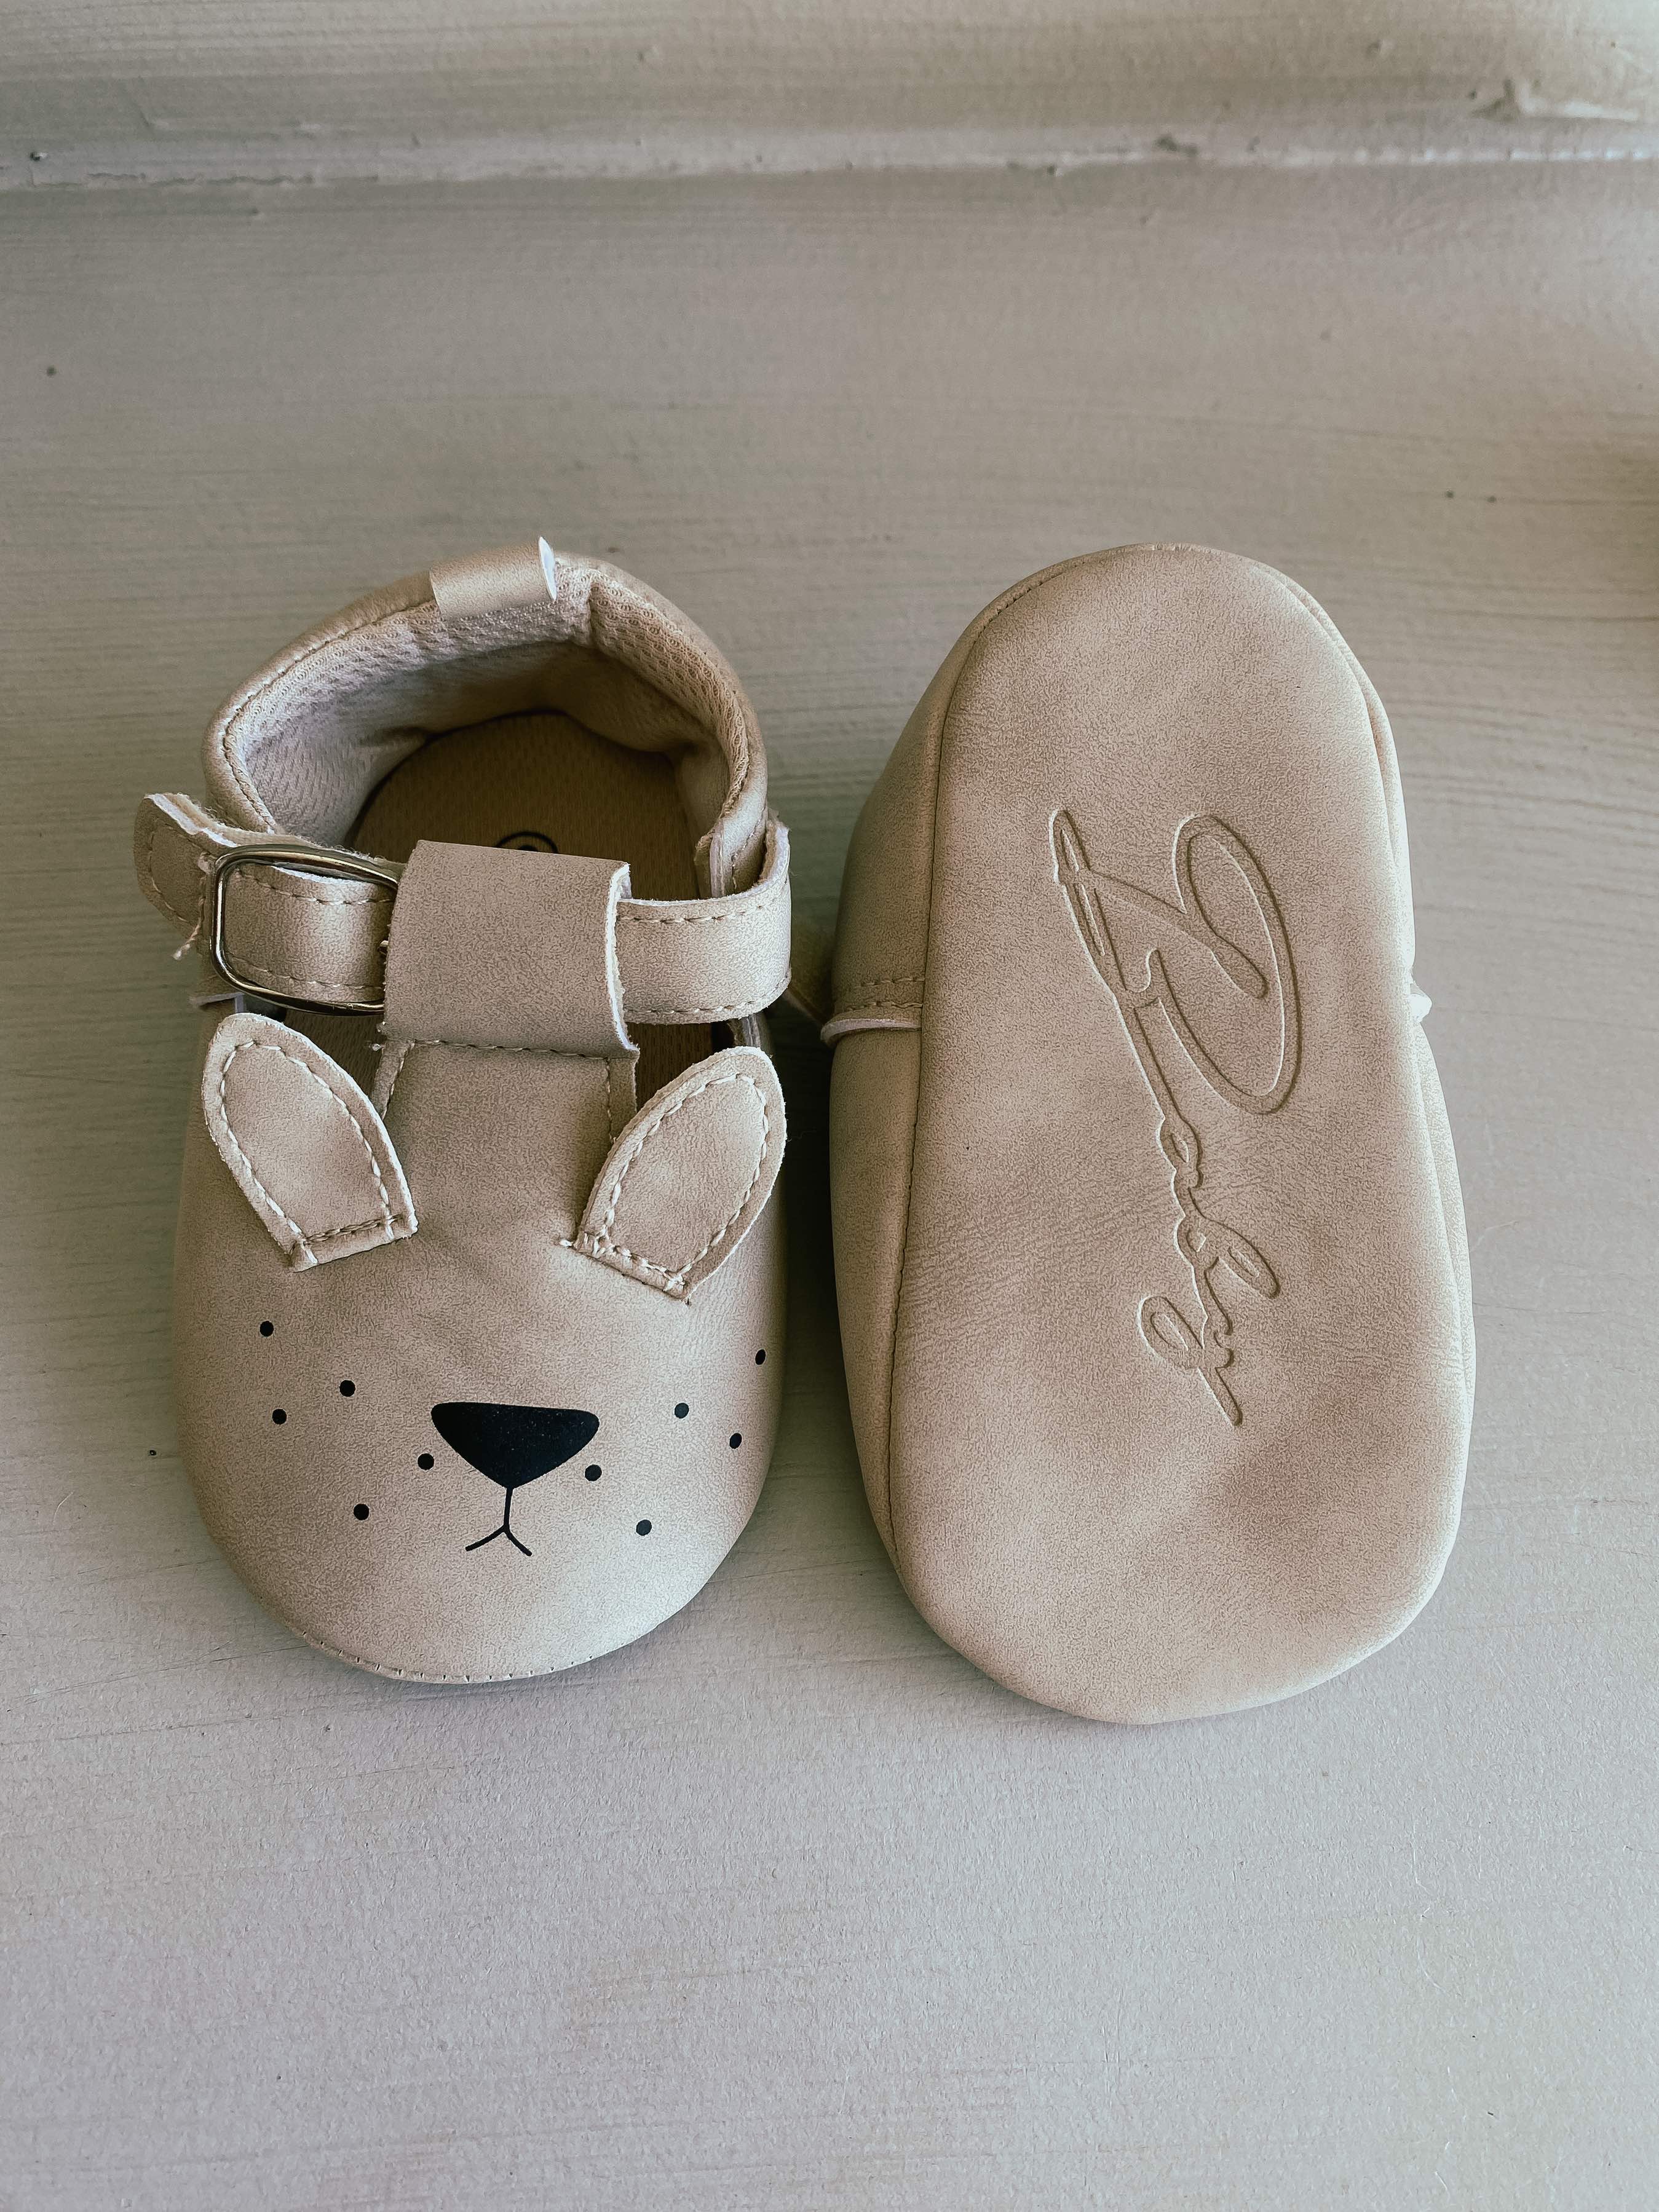 picture of baby booties with t-bar design. one is turned upside down to show the full design of the pram shoes with bunny face.